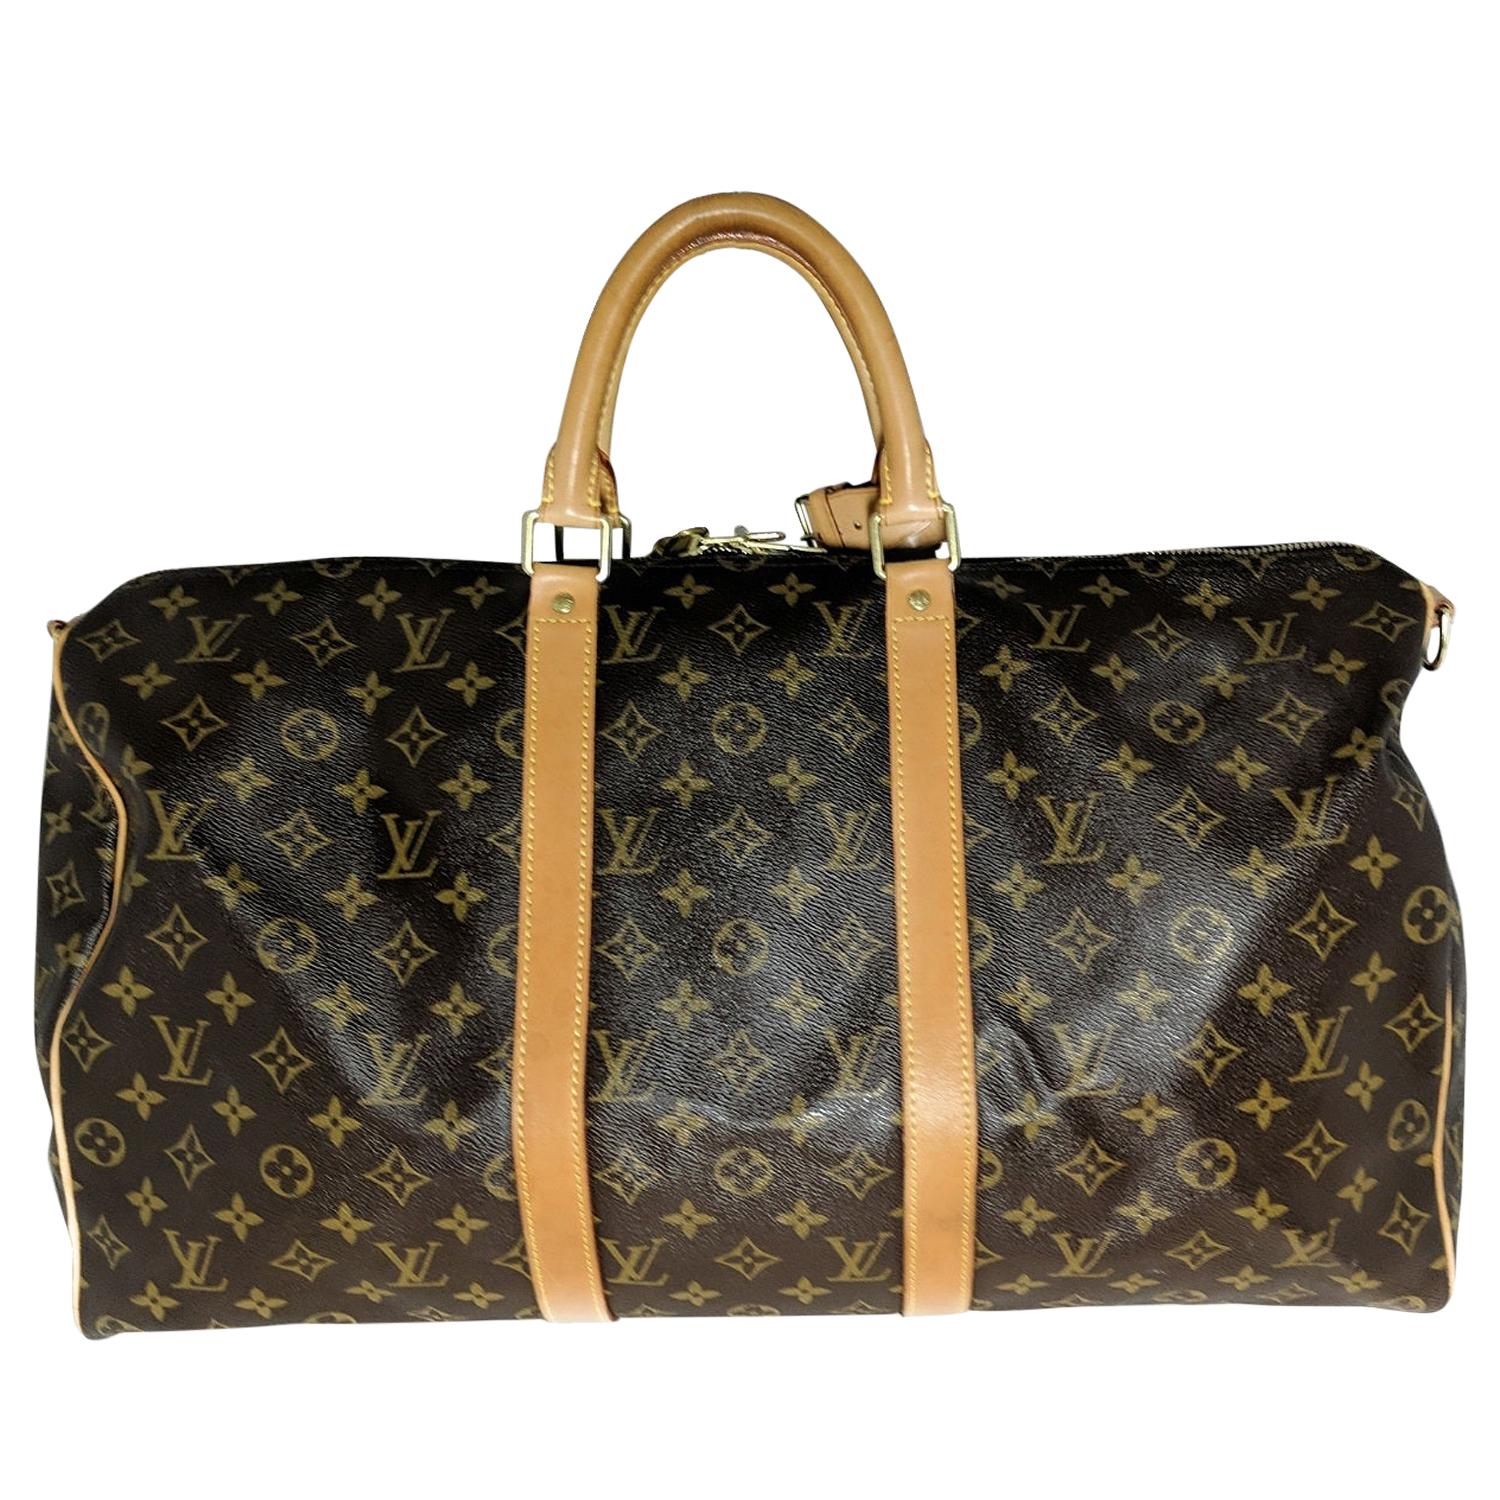 Louis Vuitton Monogram Canvas Keepall Bandouliere 50 Luggage